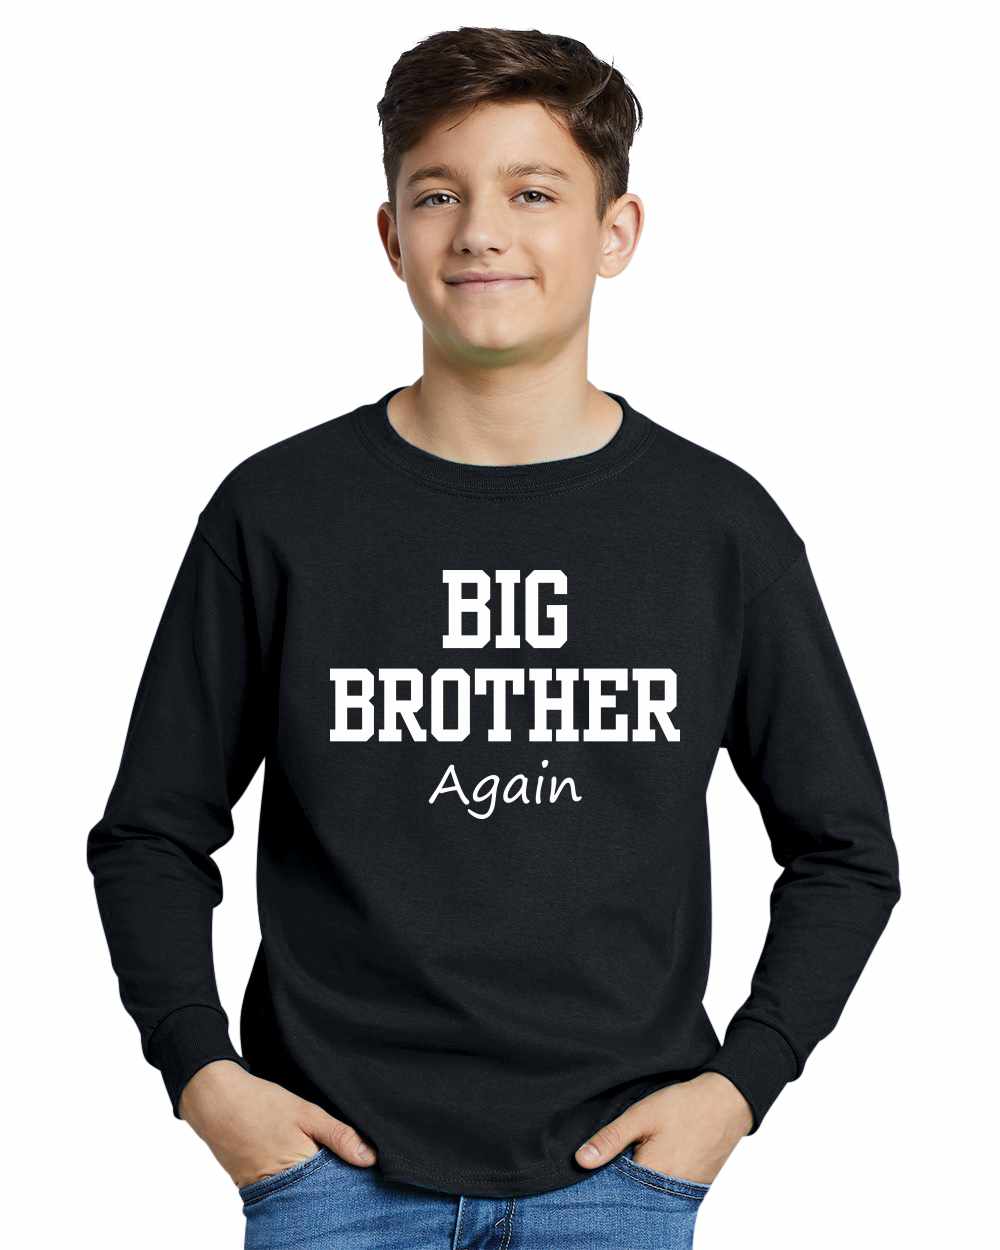 Big Brother Again on Youth Long Sleeve Shirt (#1133-203)